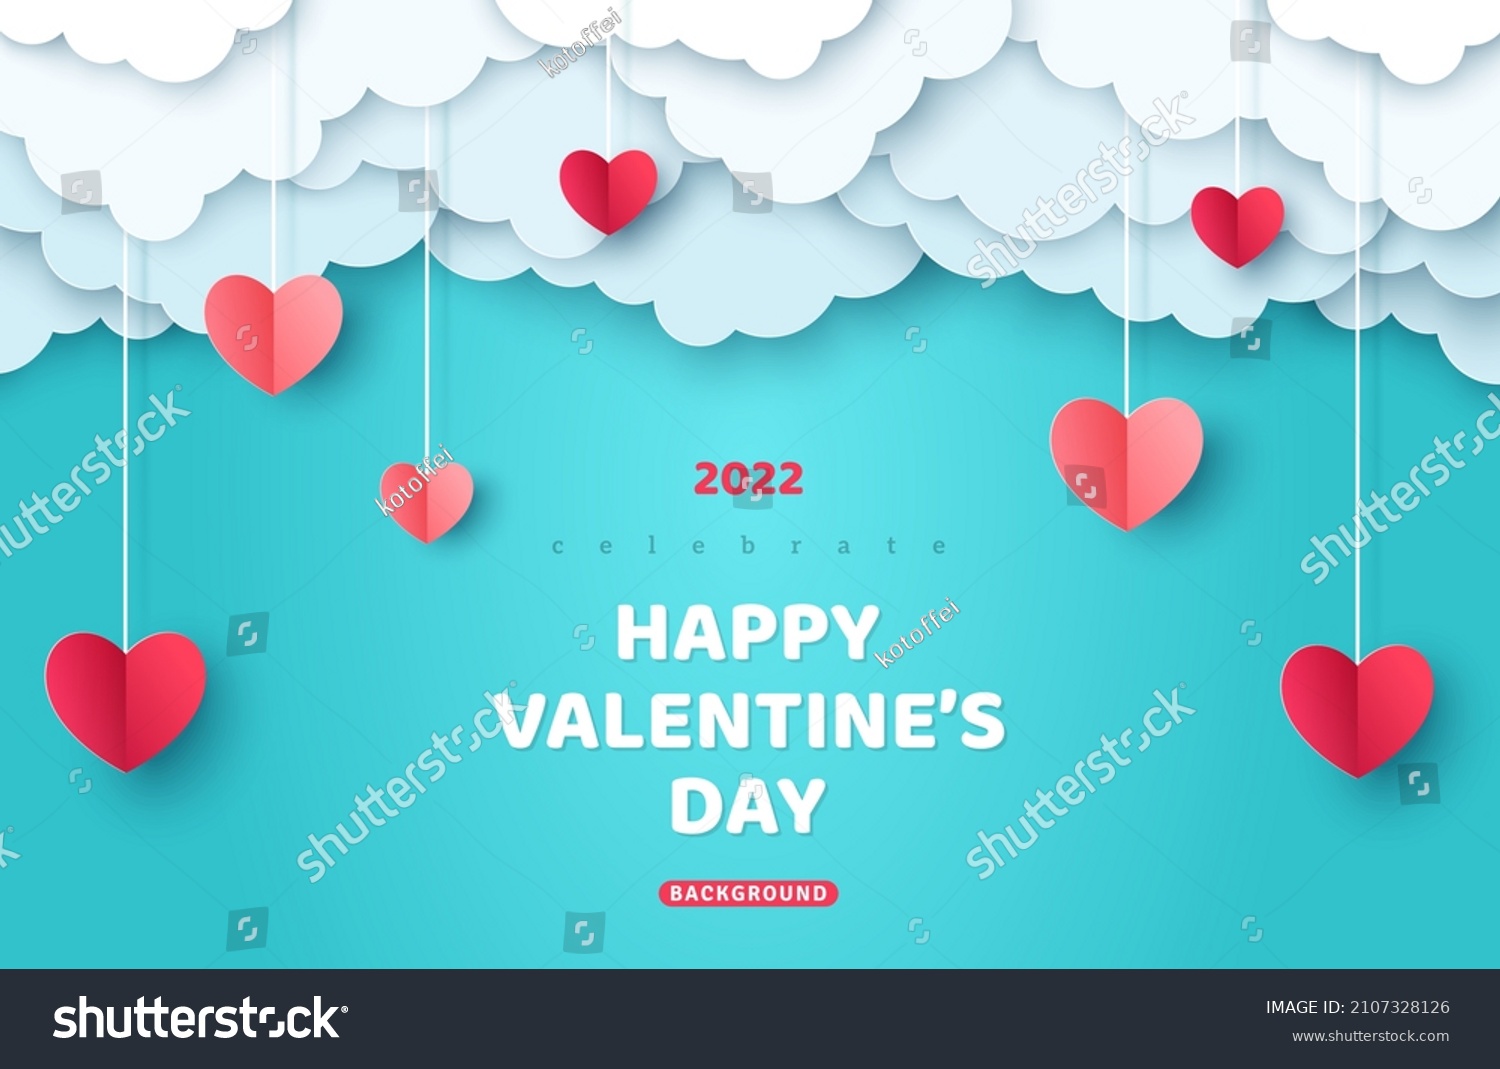 Poster or banner with blue sky and paper cut clouds. Place for text. Happy Valentine's day sale header or voucher template with hanging hearts. #2107328126